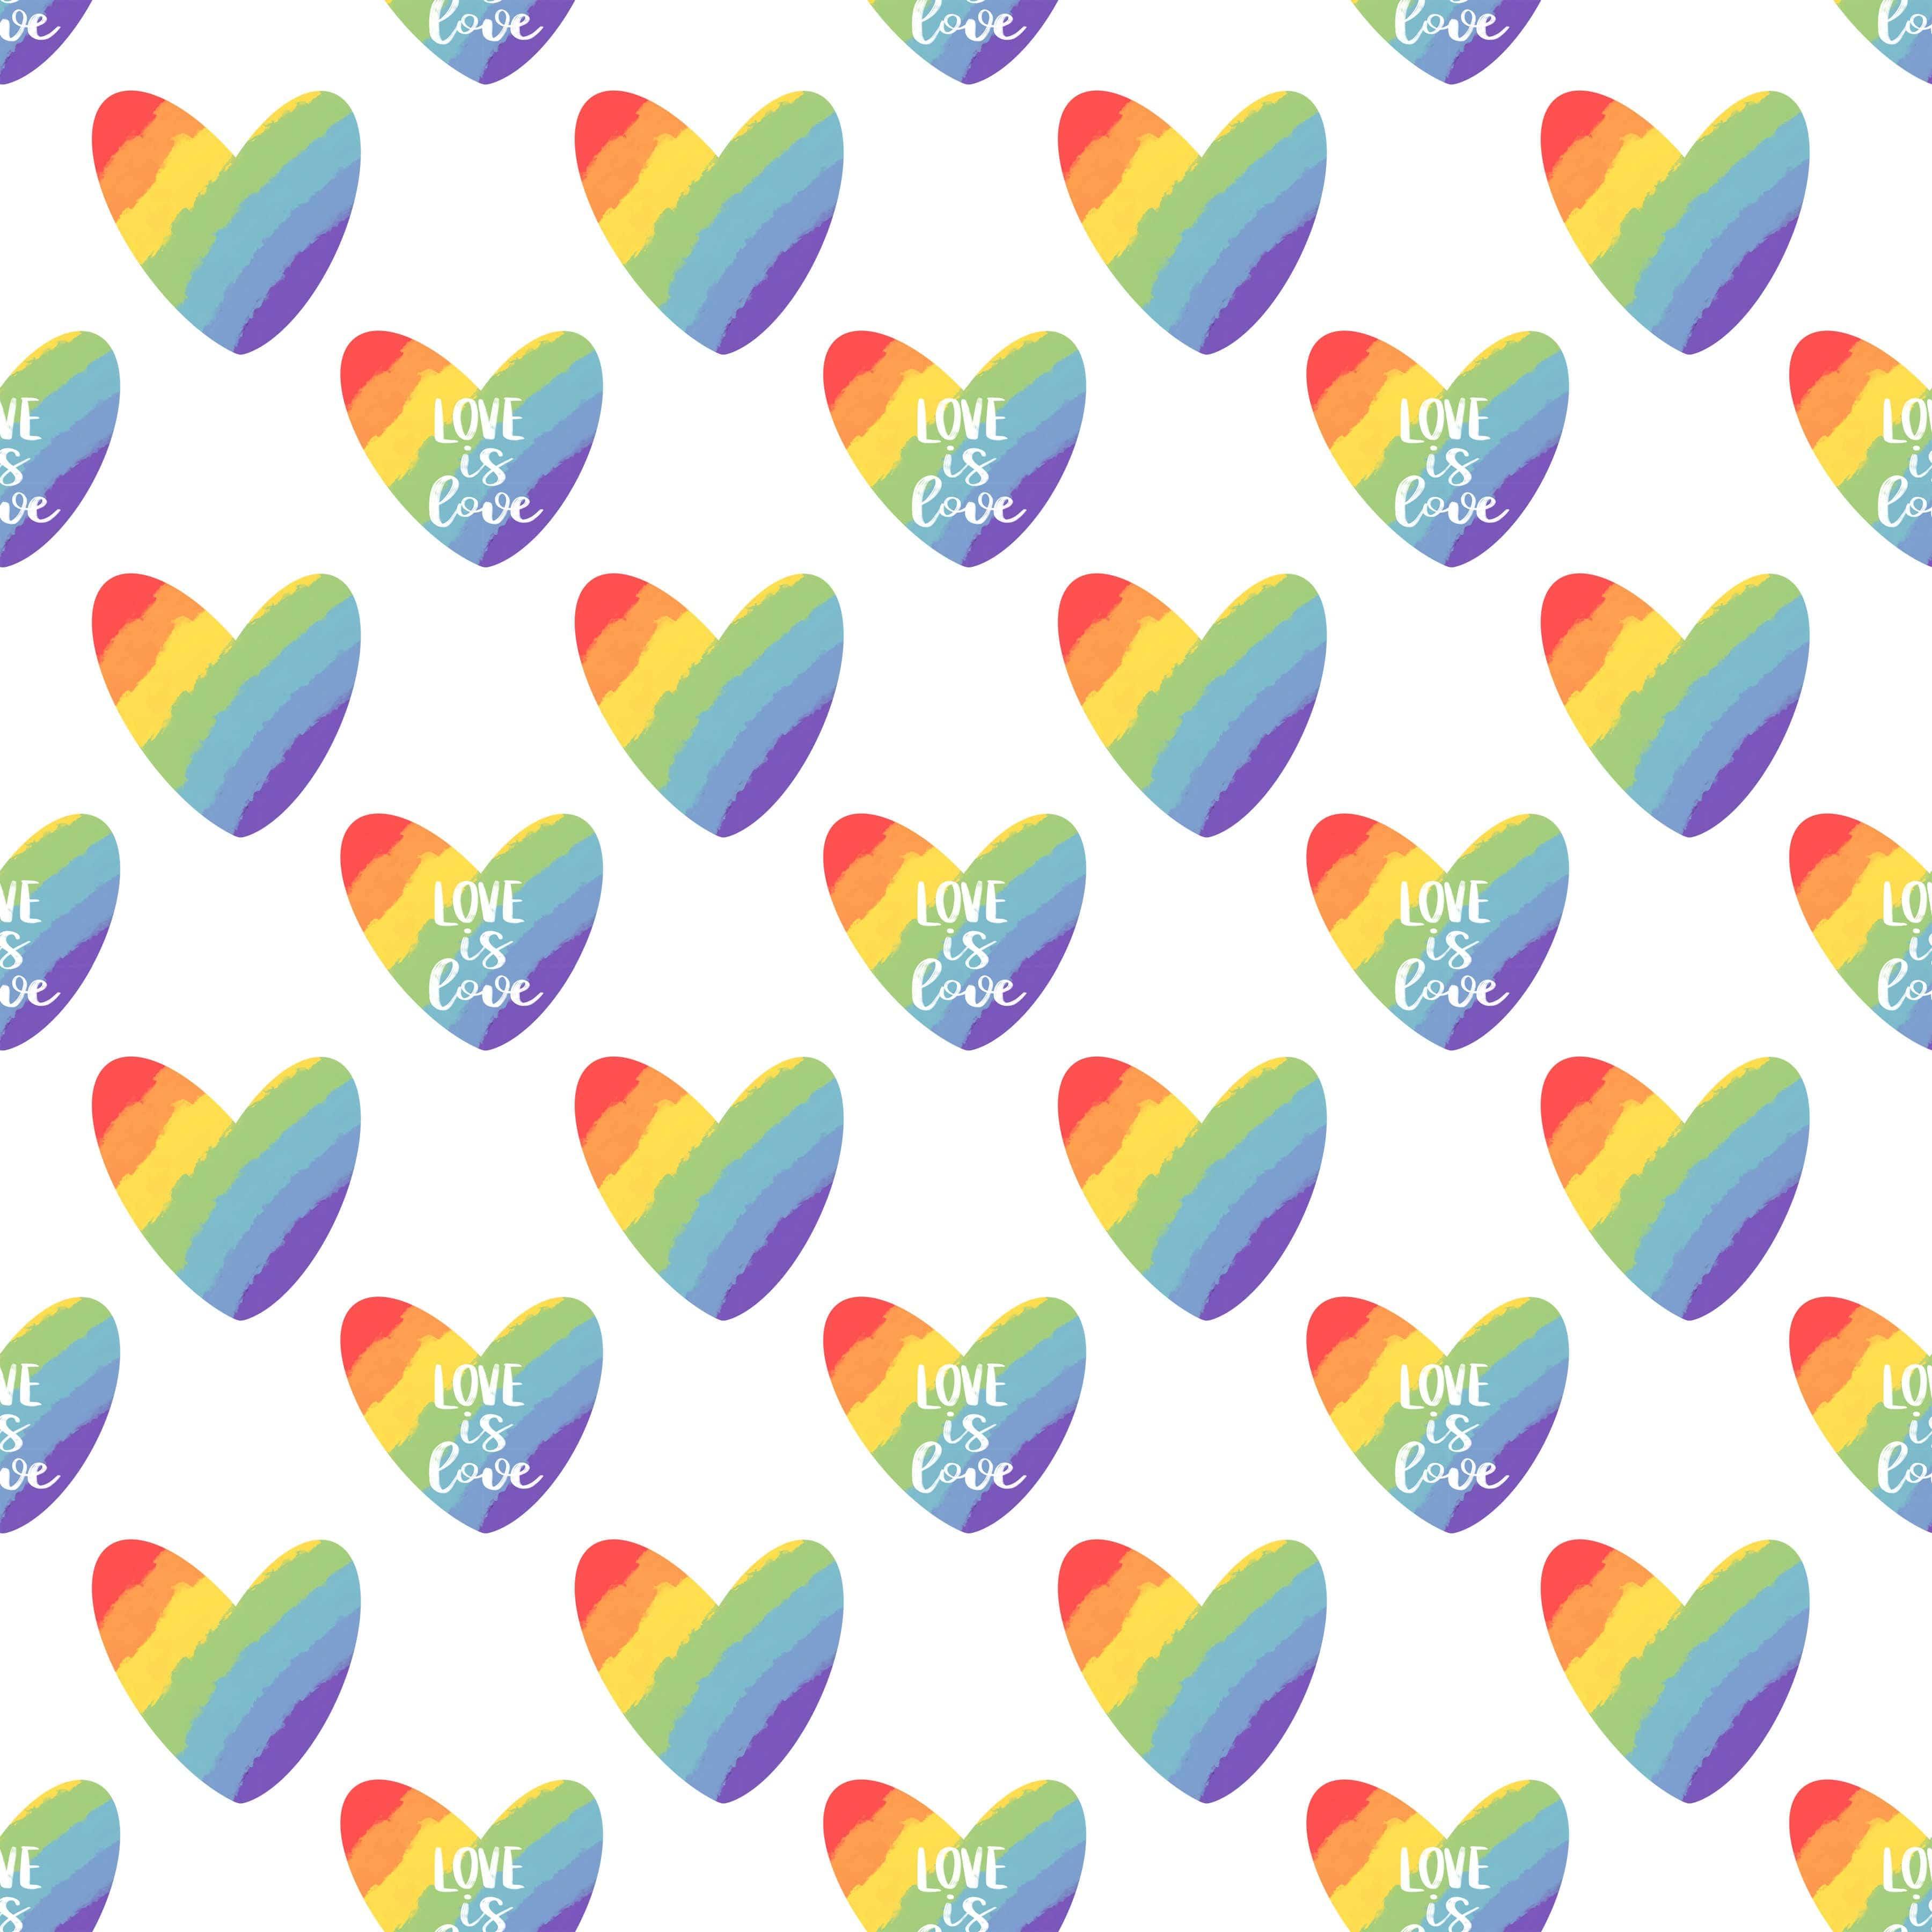 Love Wins Collection Love Is Love 12 x 12 Double-Sided Scrapbook Paper by SSC Designs - Scrapbook Supply Companies